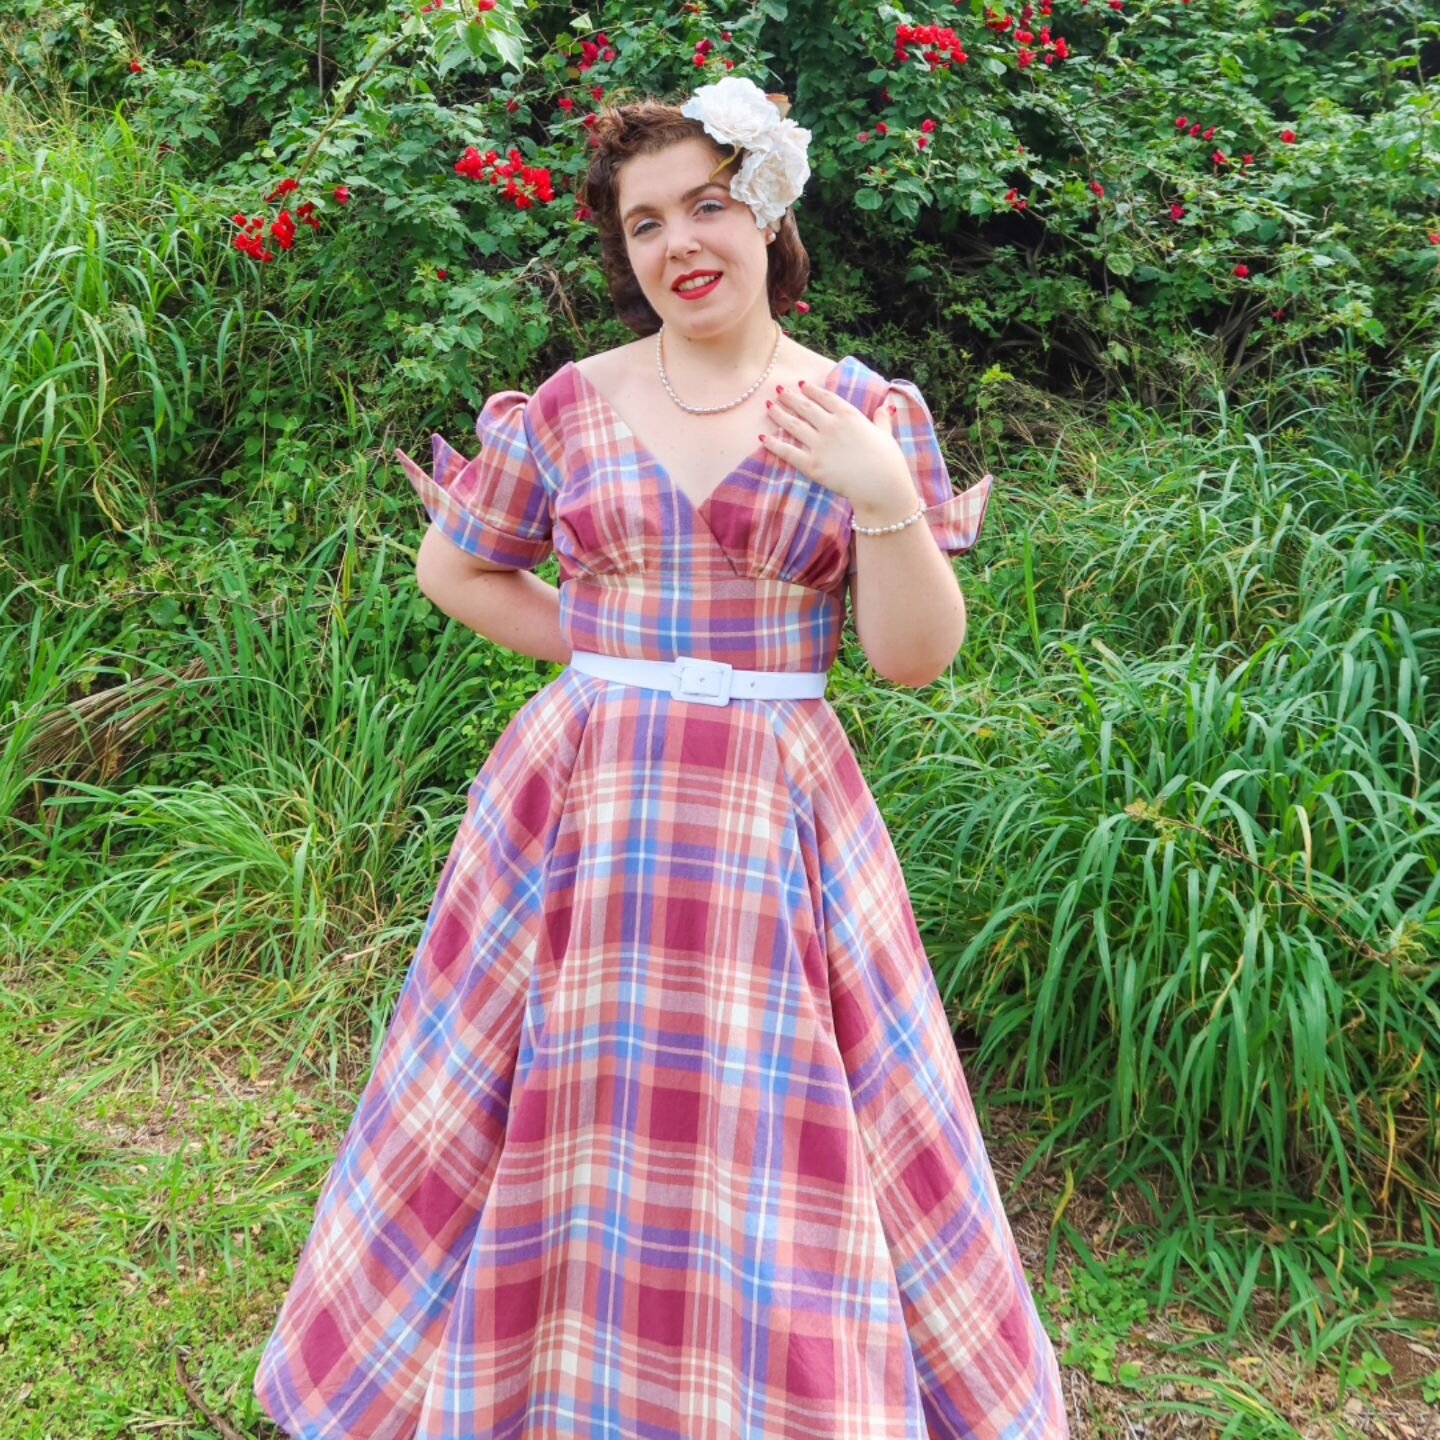 Easter Sunday, 1955. This is my first plaid dress, which I drafted based on a 1955 Australian fashion magazine cover. This fabric is very lovely and has a great hand to it! The colors reminds me of Princess Aurora's color changing dress, so I&rsquo;v